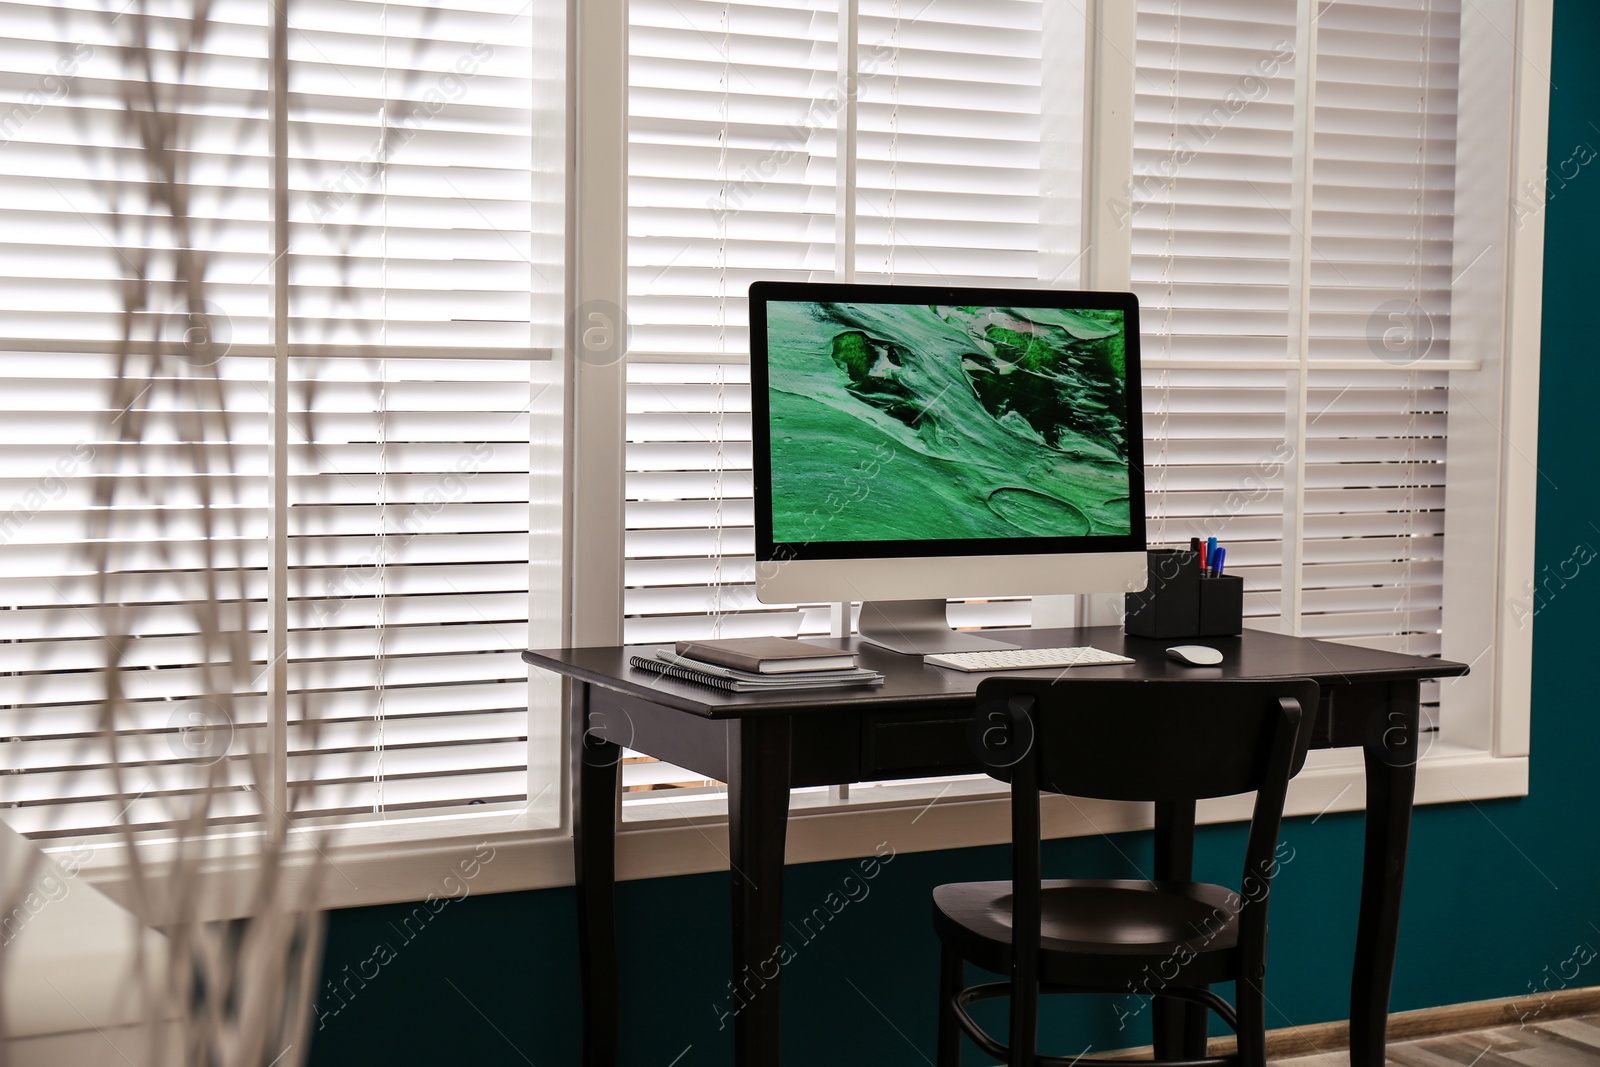 Photo of Comfortable workplace near window with white horizontal blinds in room